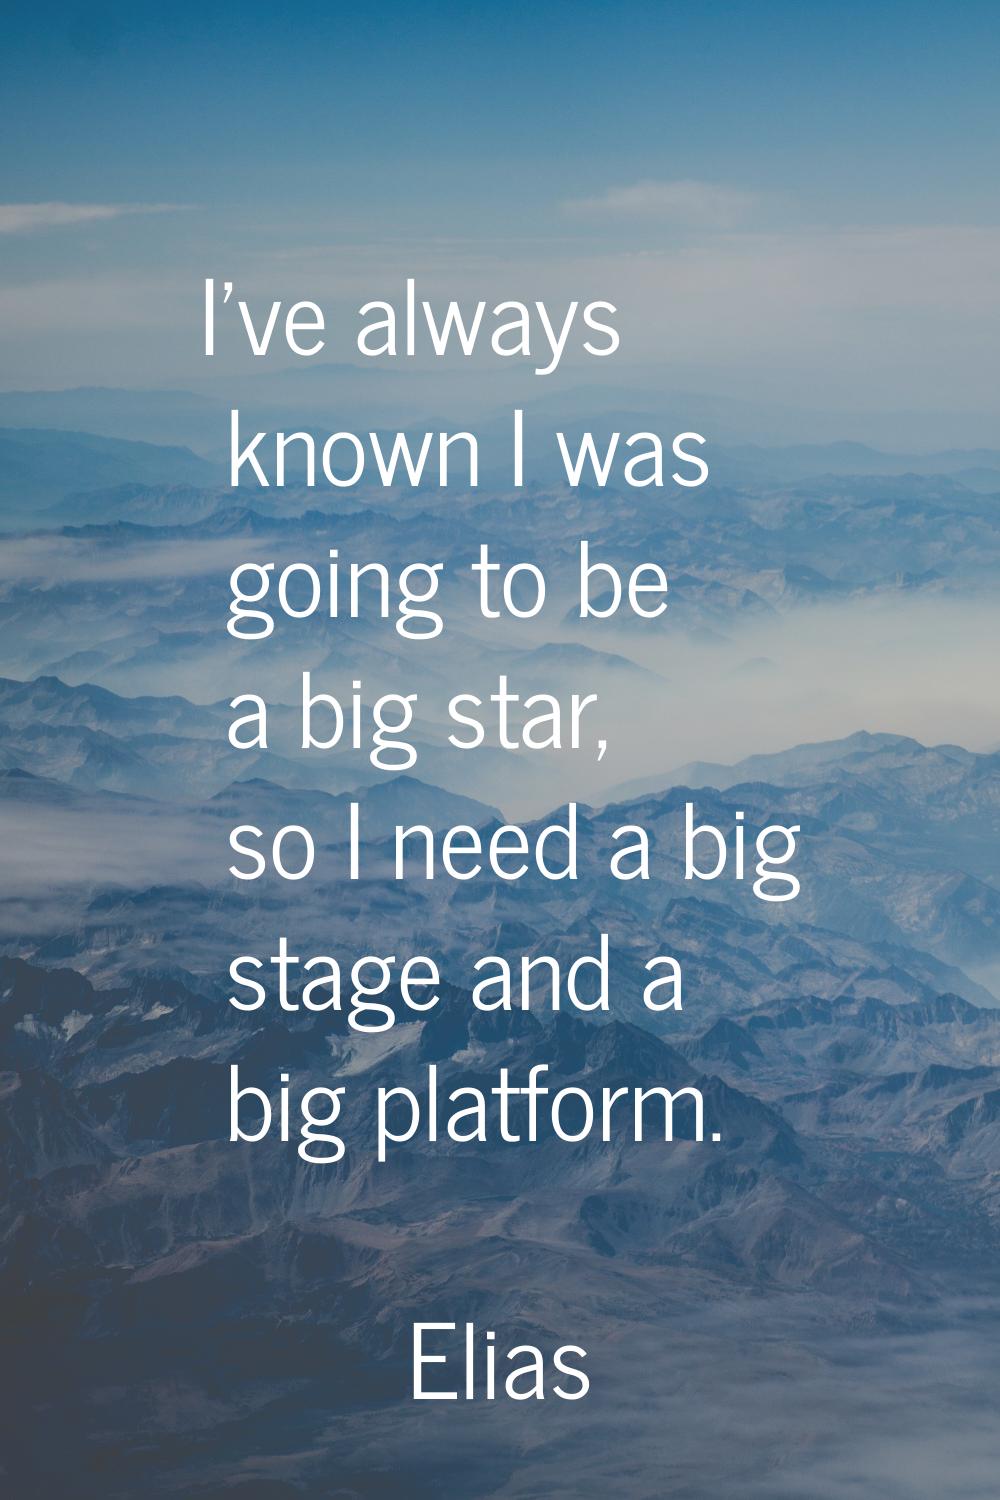 I've always known I was going to be a big star, so I need a big stage and a big platform.